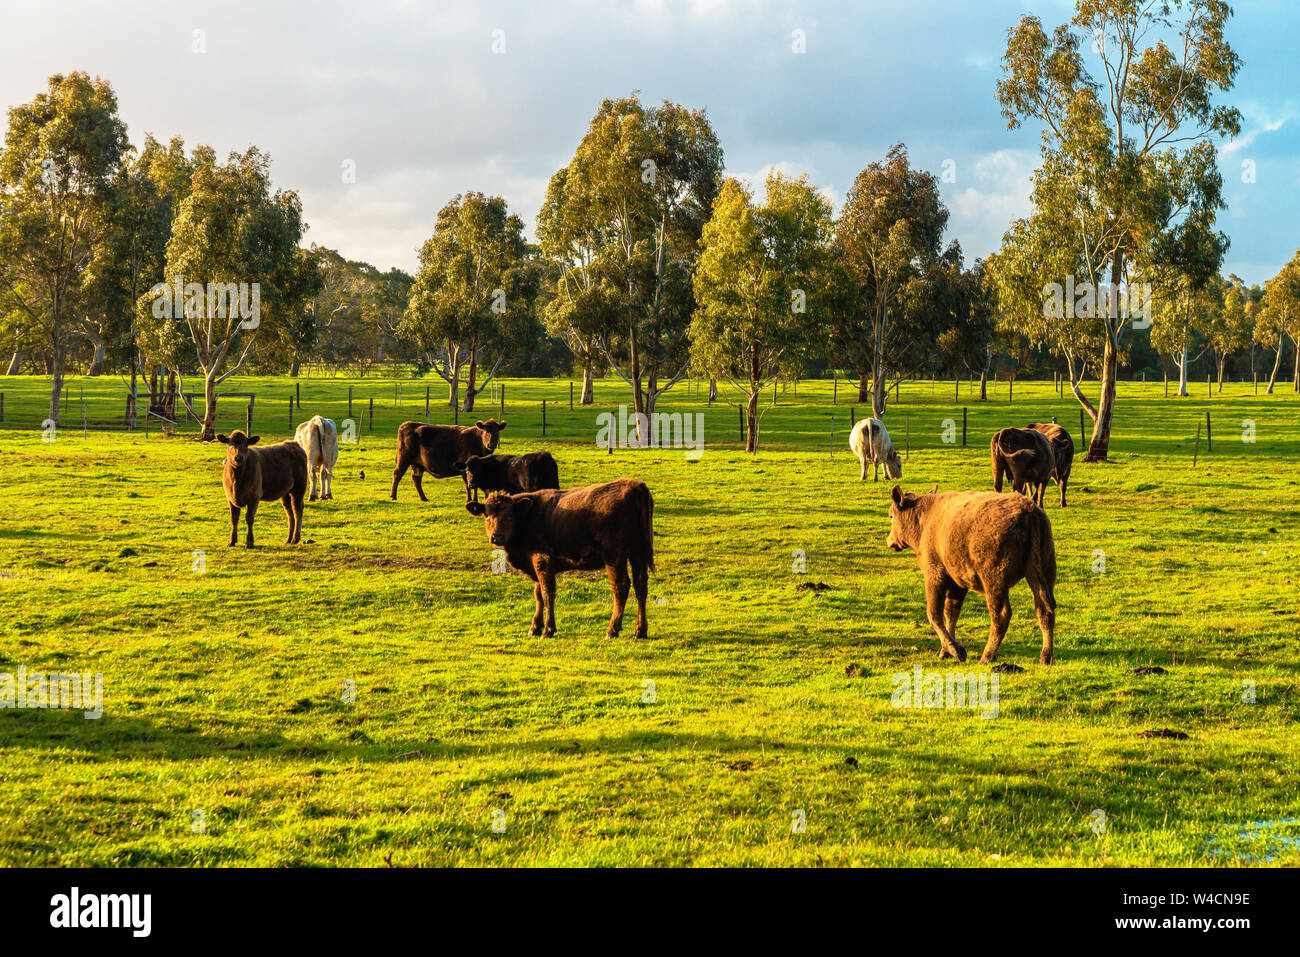 Cows grazing on a daily farm in rural South Australia during winter season Stock Photo